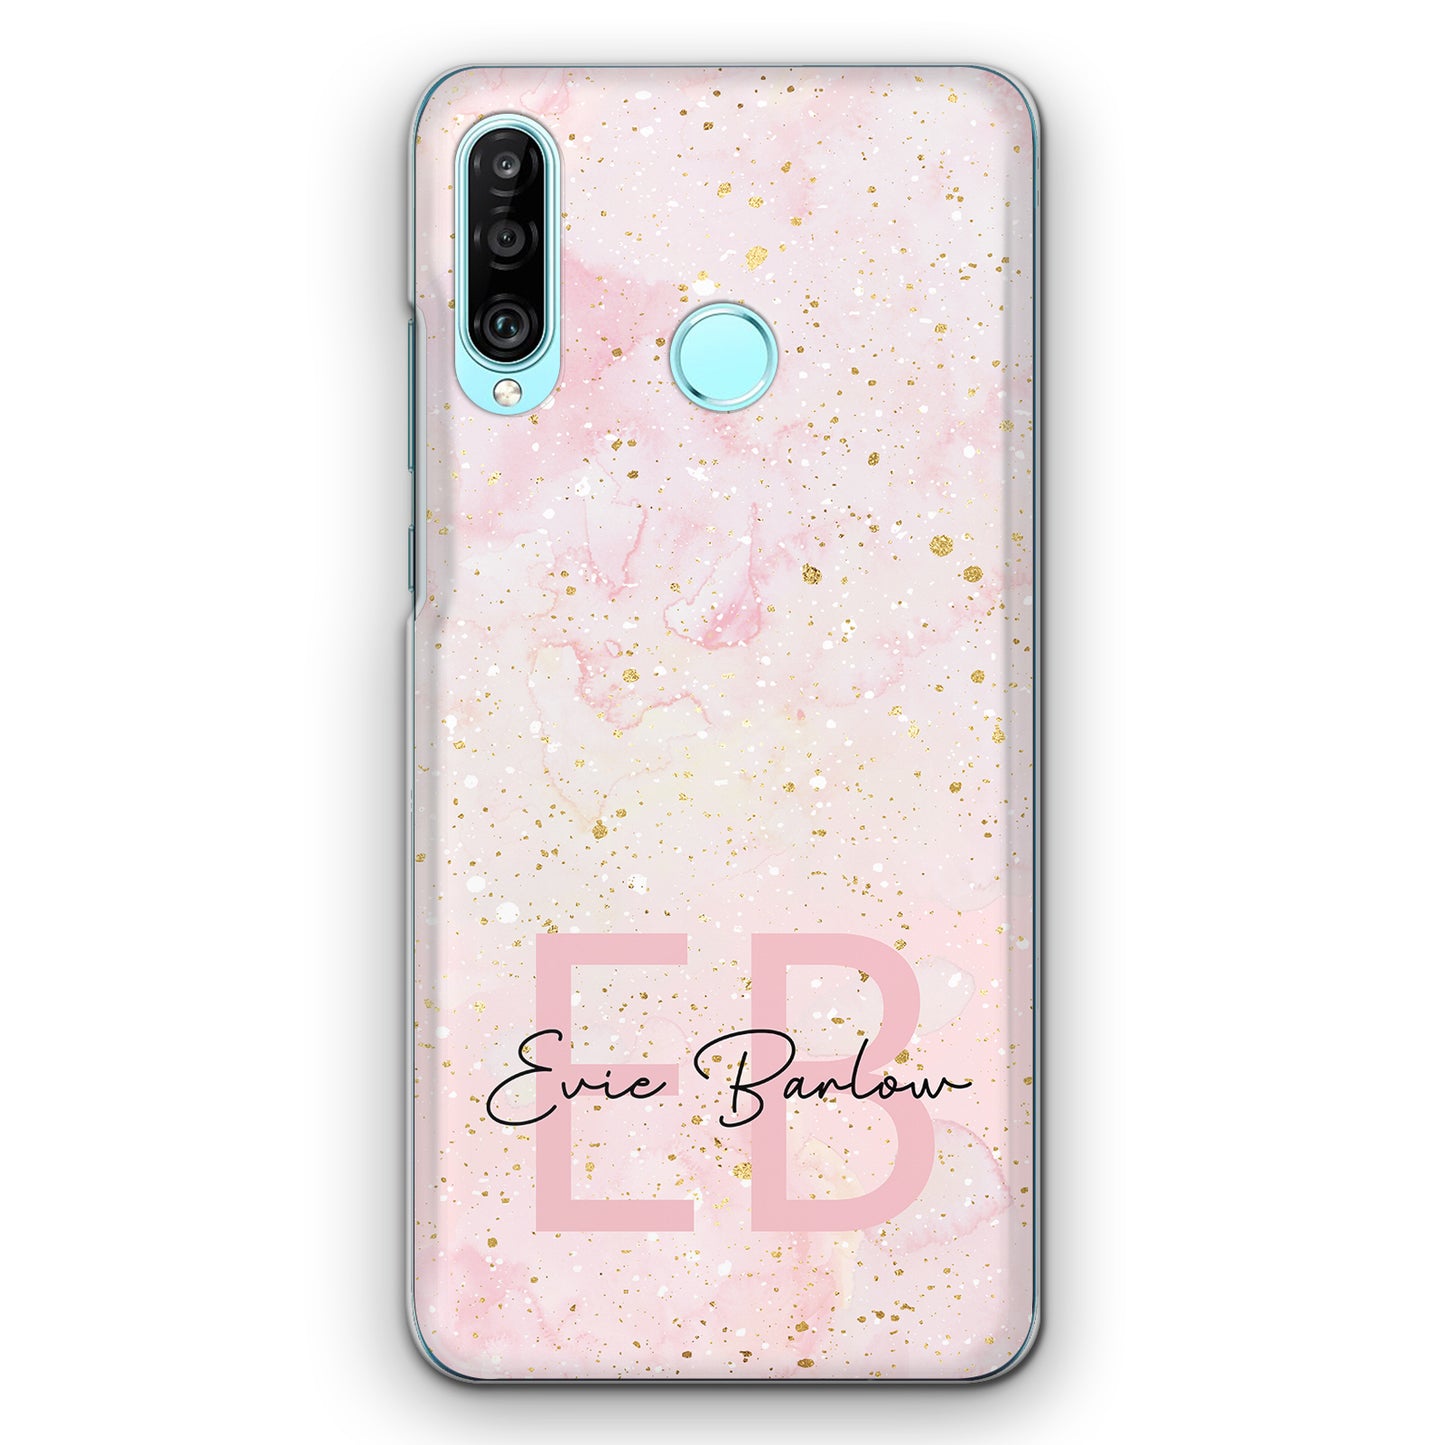 Personalised LG Phone Hard Case with Soft Monogram and Name on Baby Pink Marble